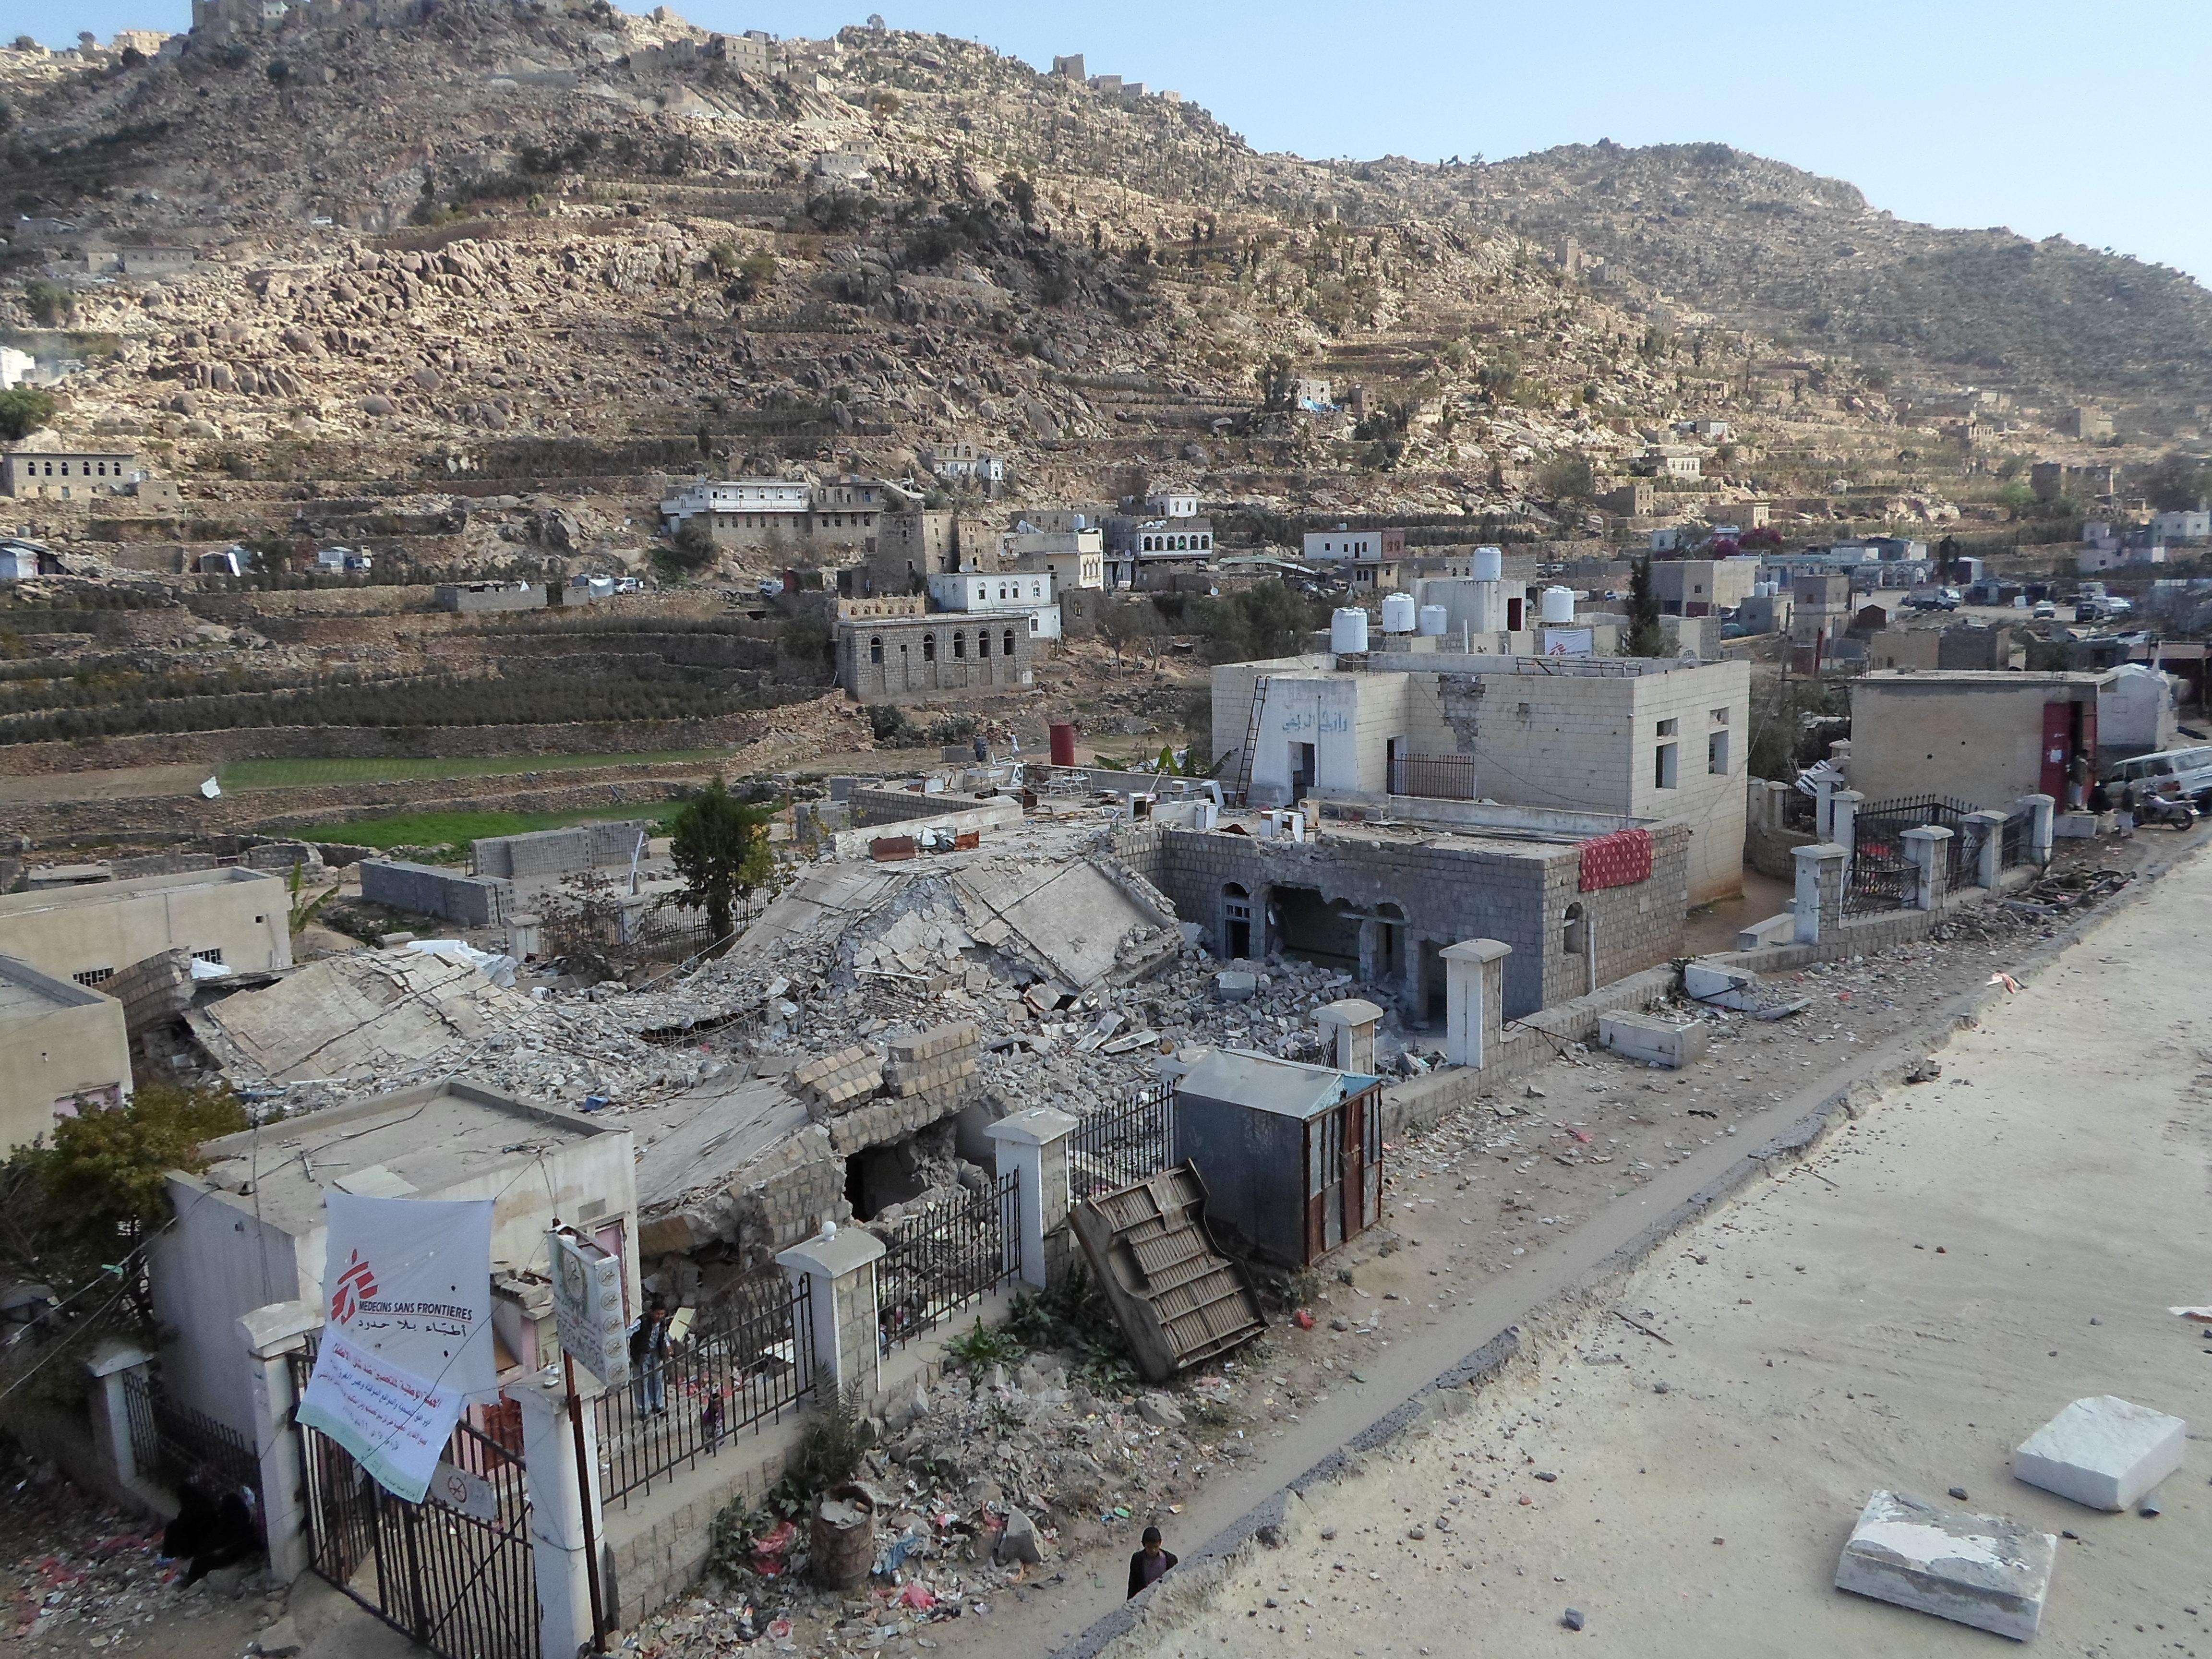 he Shiara hospital, an MSF-supported facility in Razeh district (Northern Yemen), was hit by a projectile in northern Yemen on January 10thm resulting in five deaths, eight injured and the collapse of several buildings of the medical facility